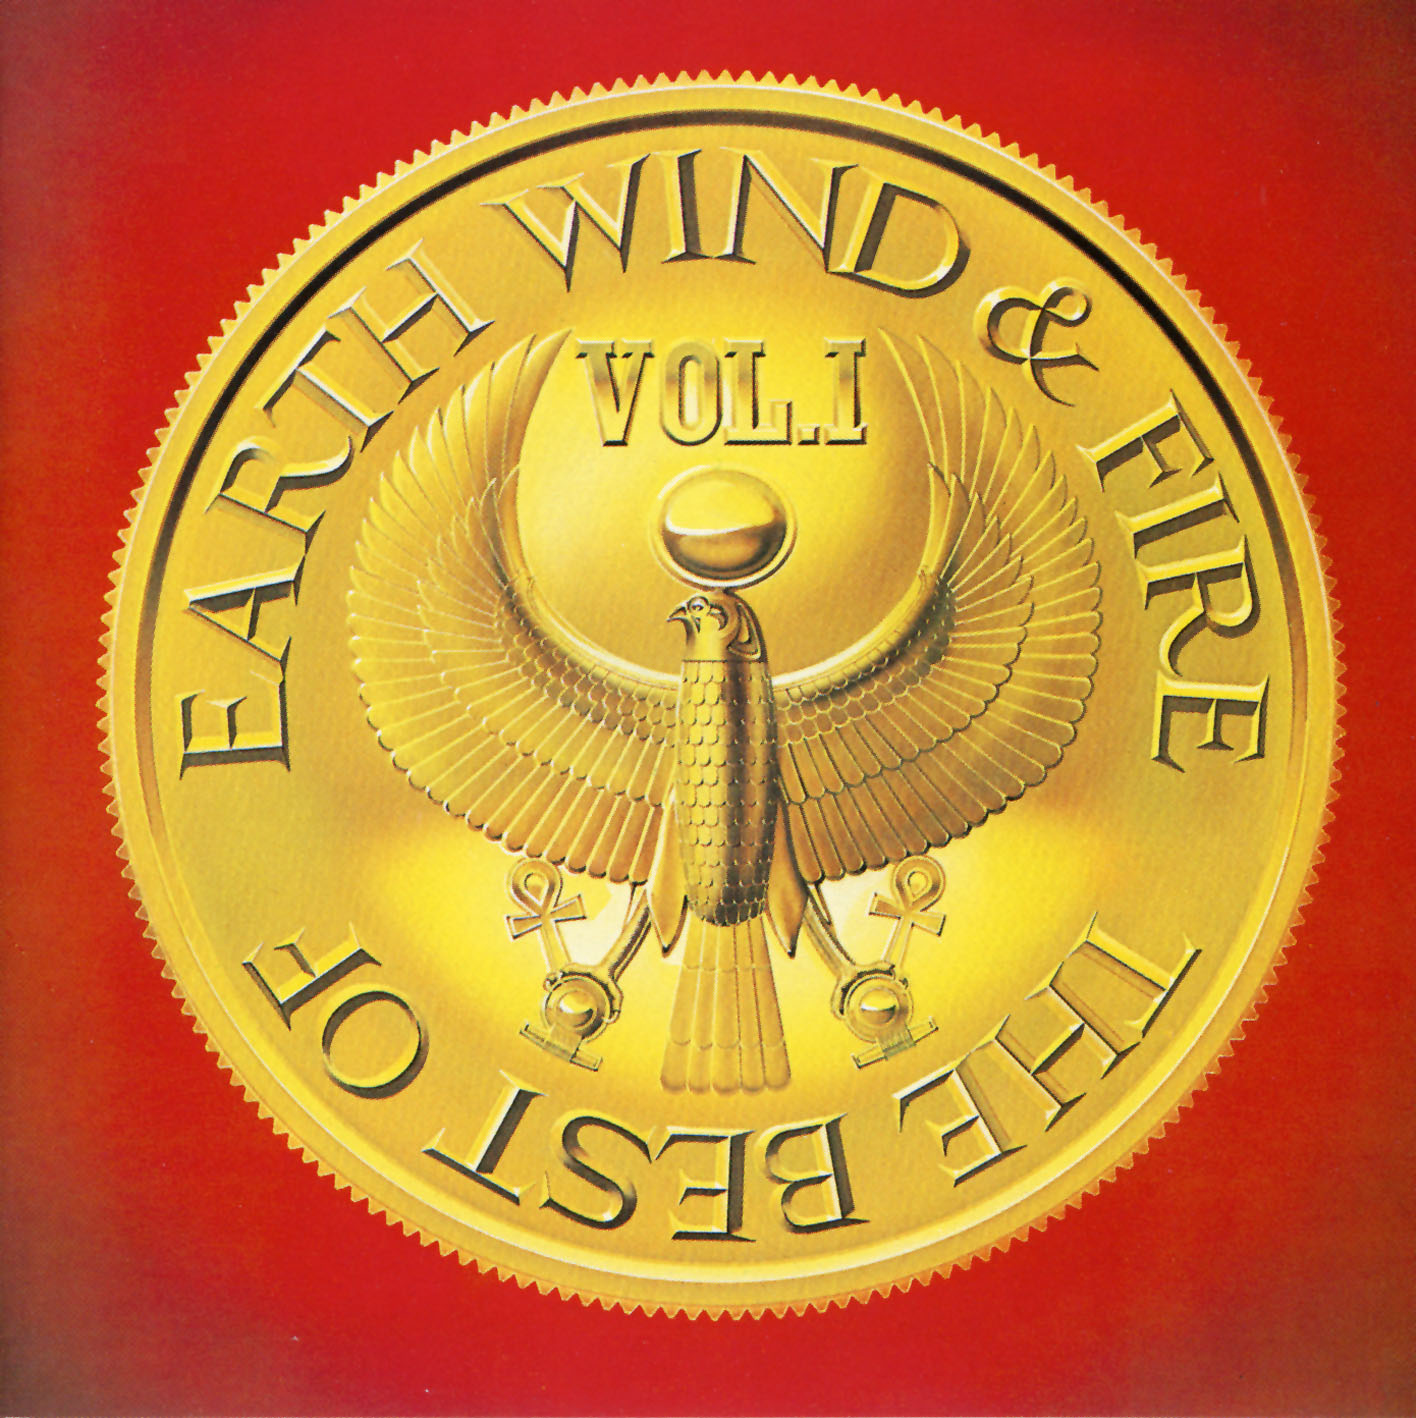 The Best Of Earth, Wind & Fire